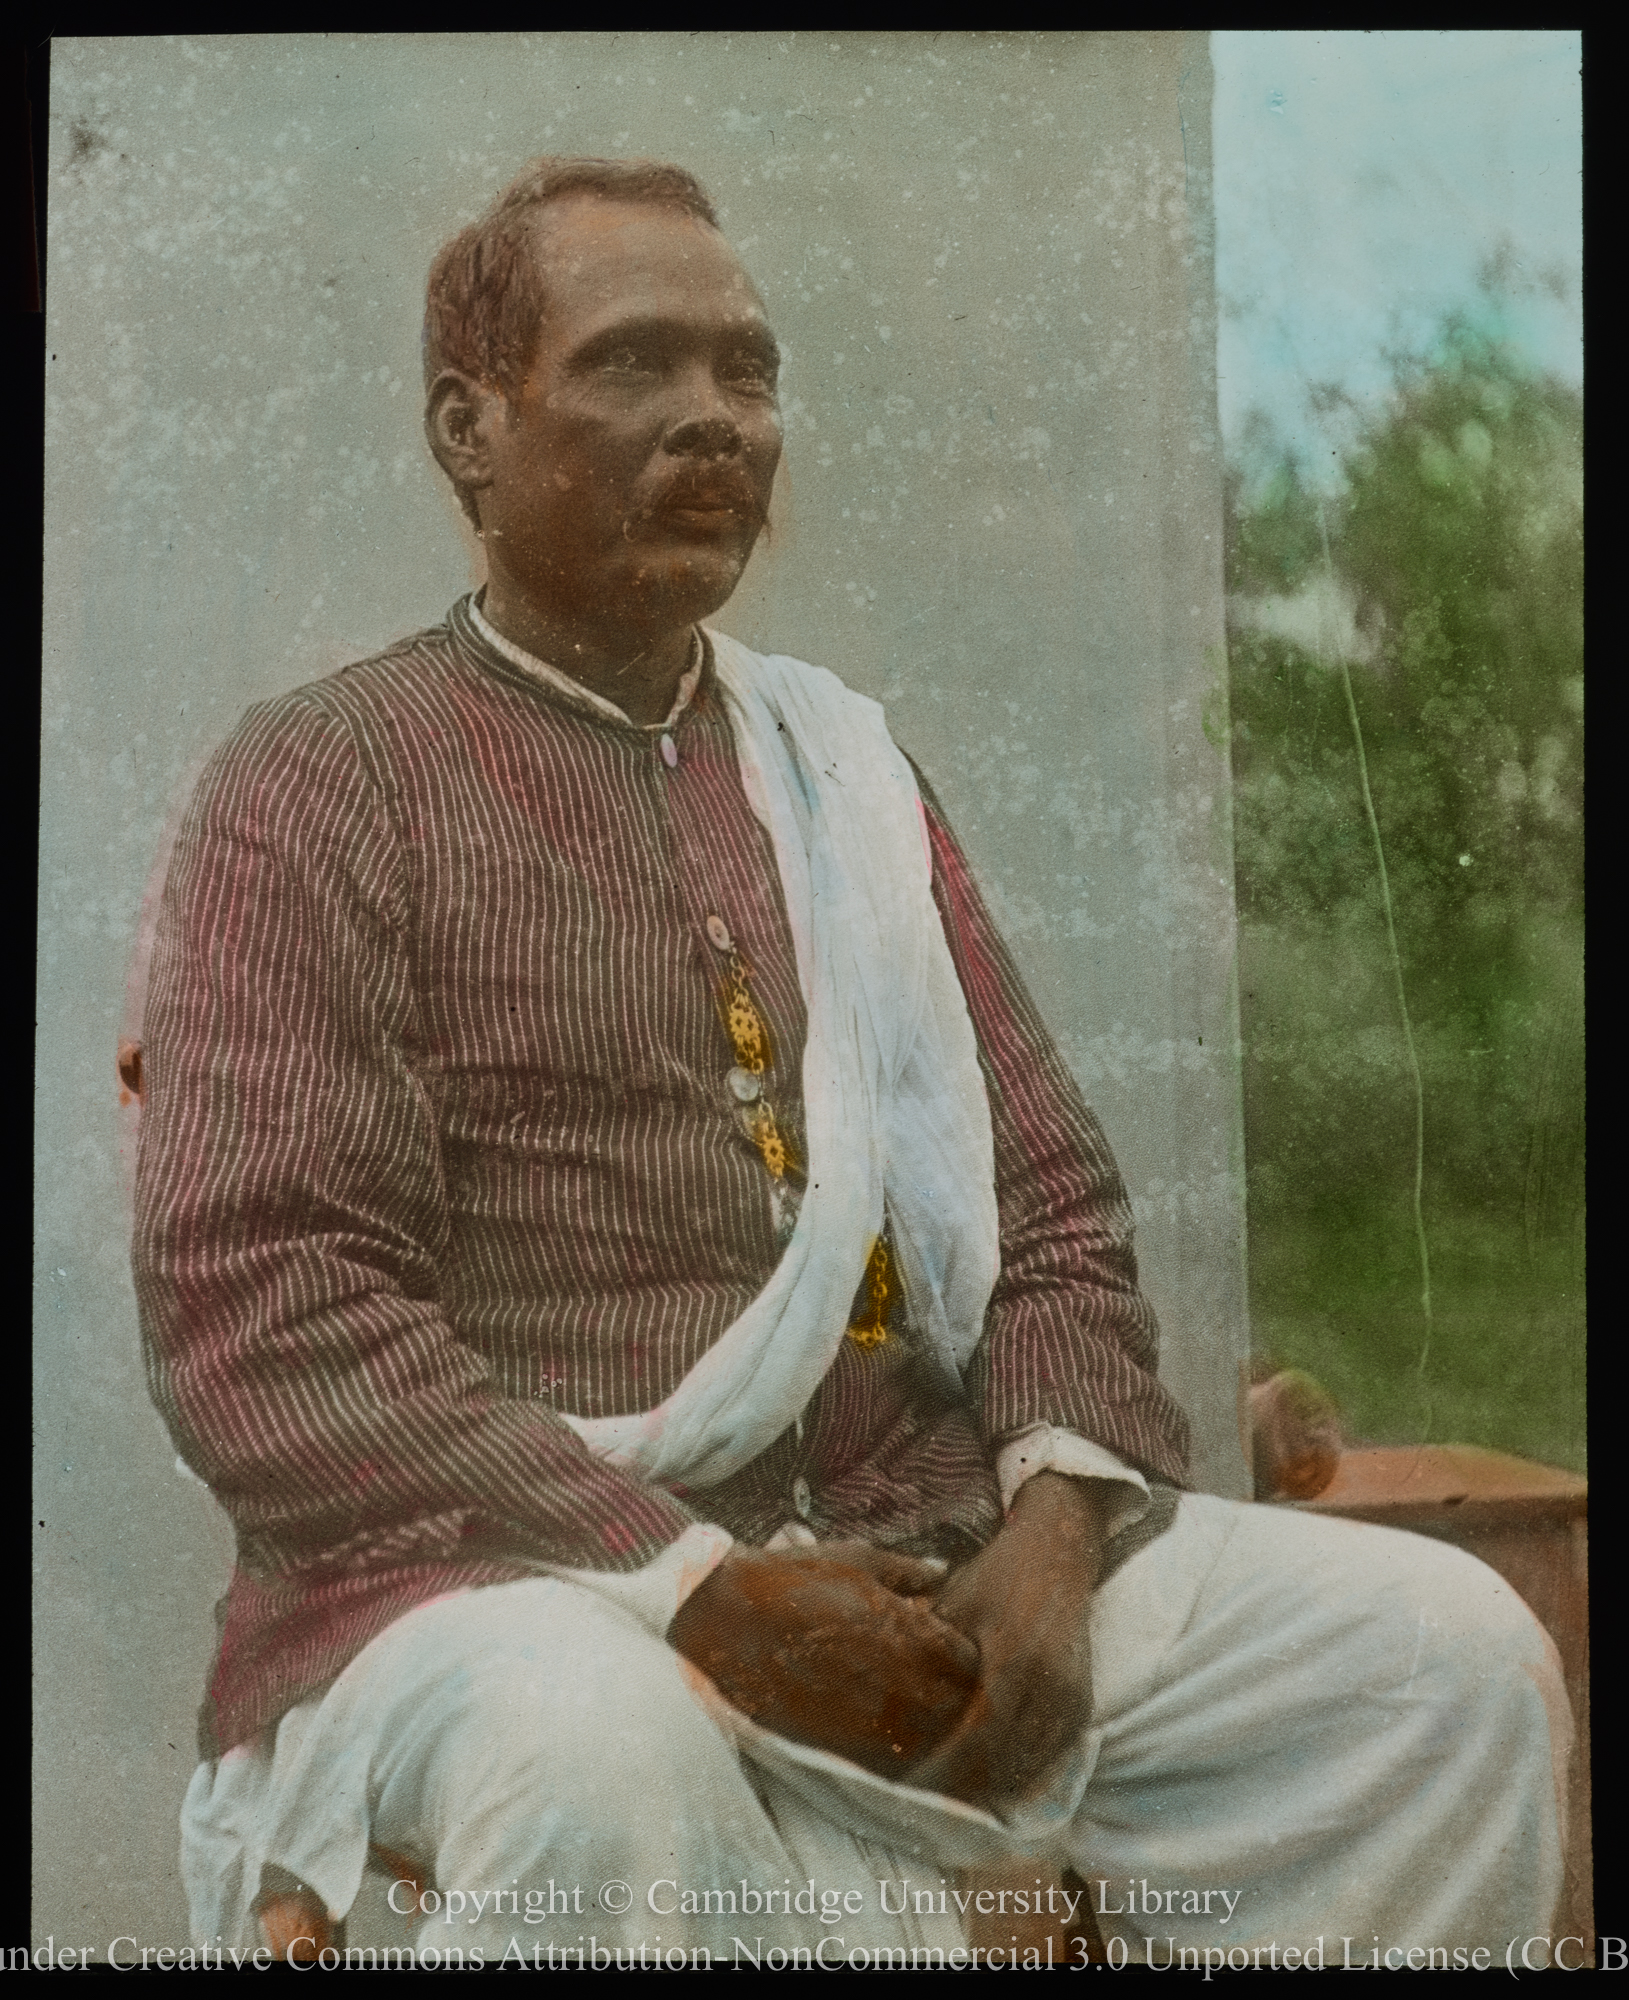 First Santal man ordained, Bengal Mission, 1900 - 1930